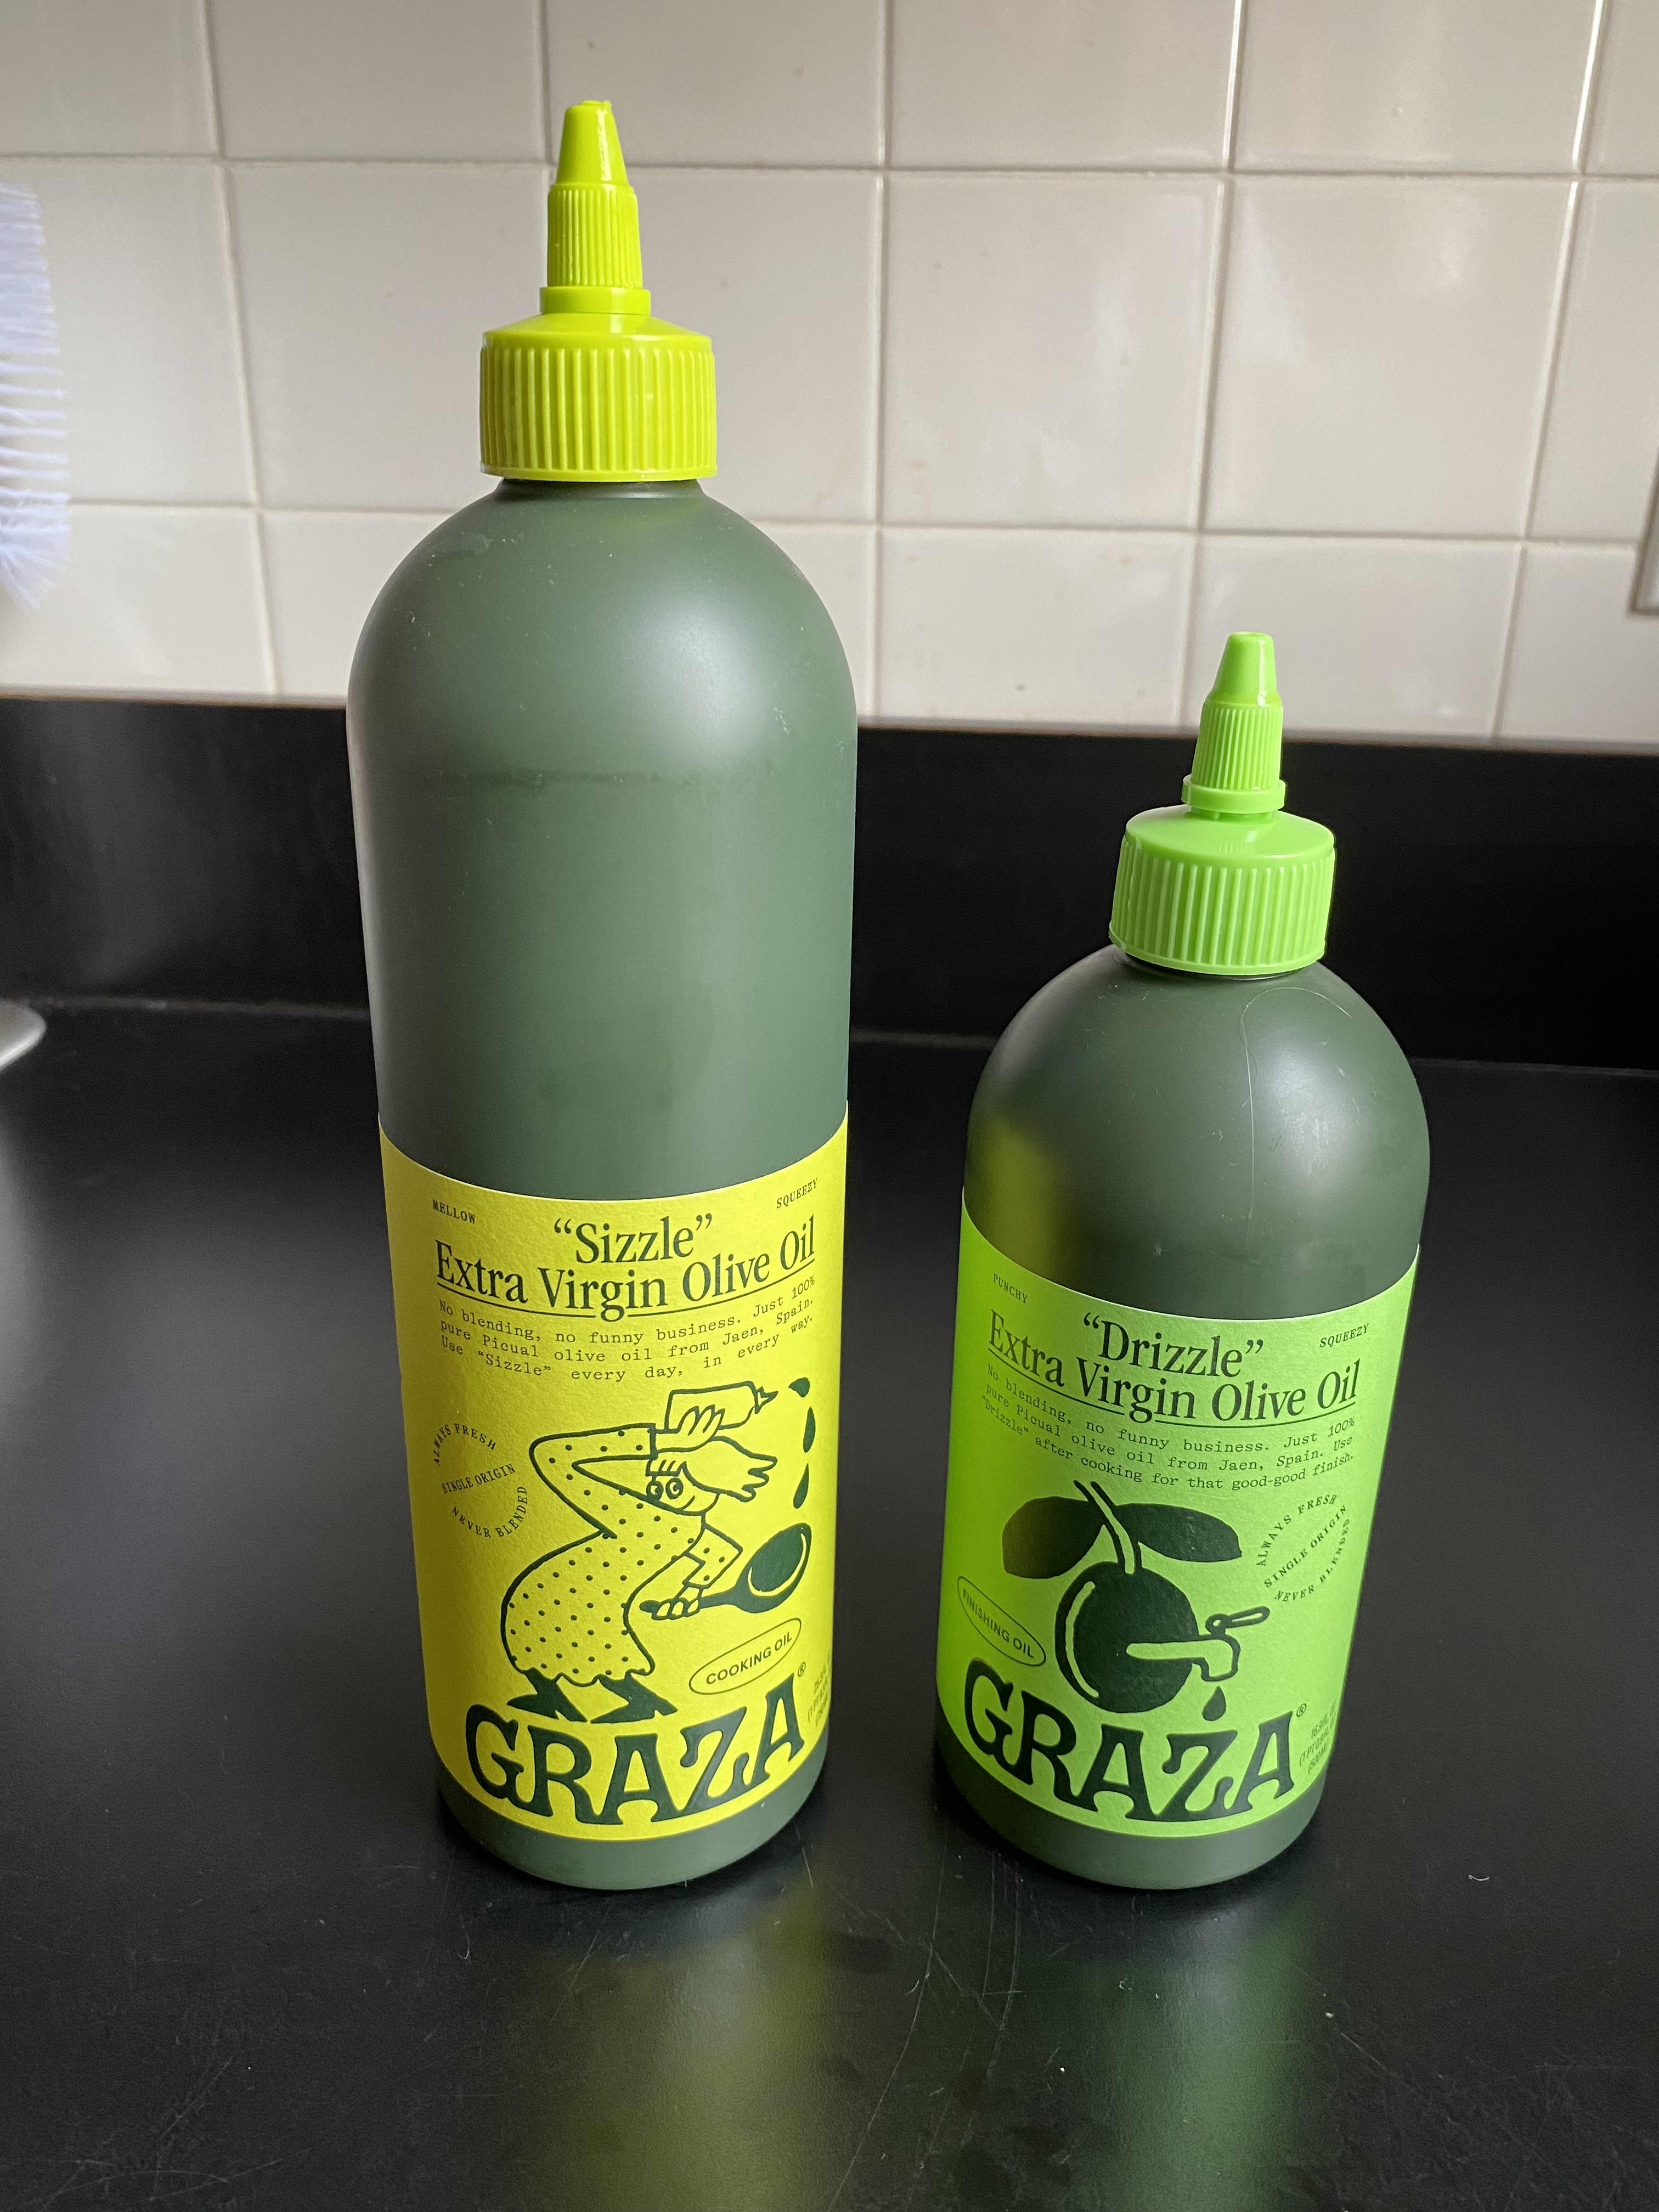 We Tried Graza, The New Olive Oil That Comes in a Squeeze Bottle